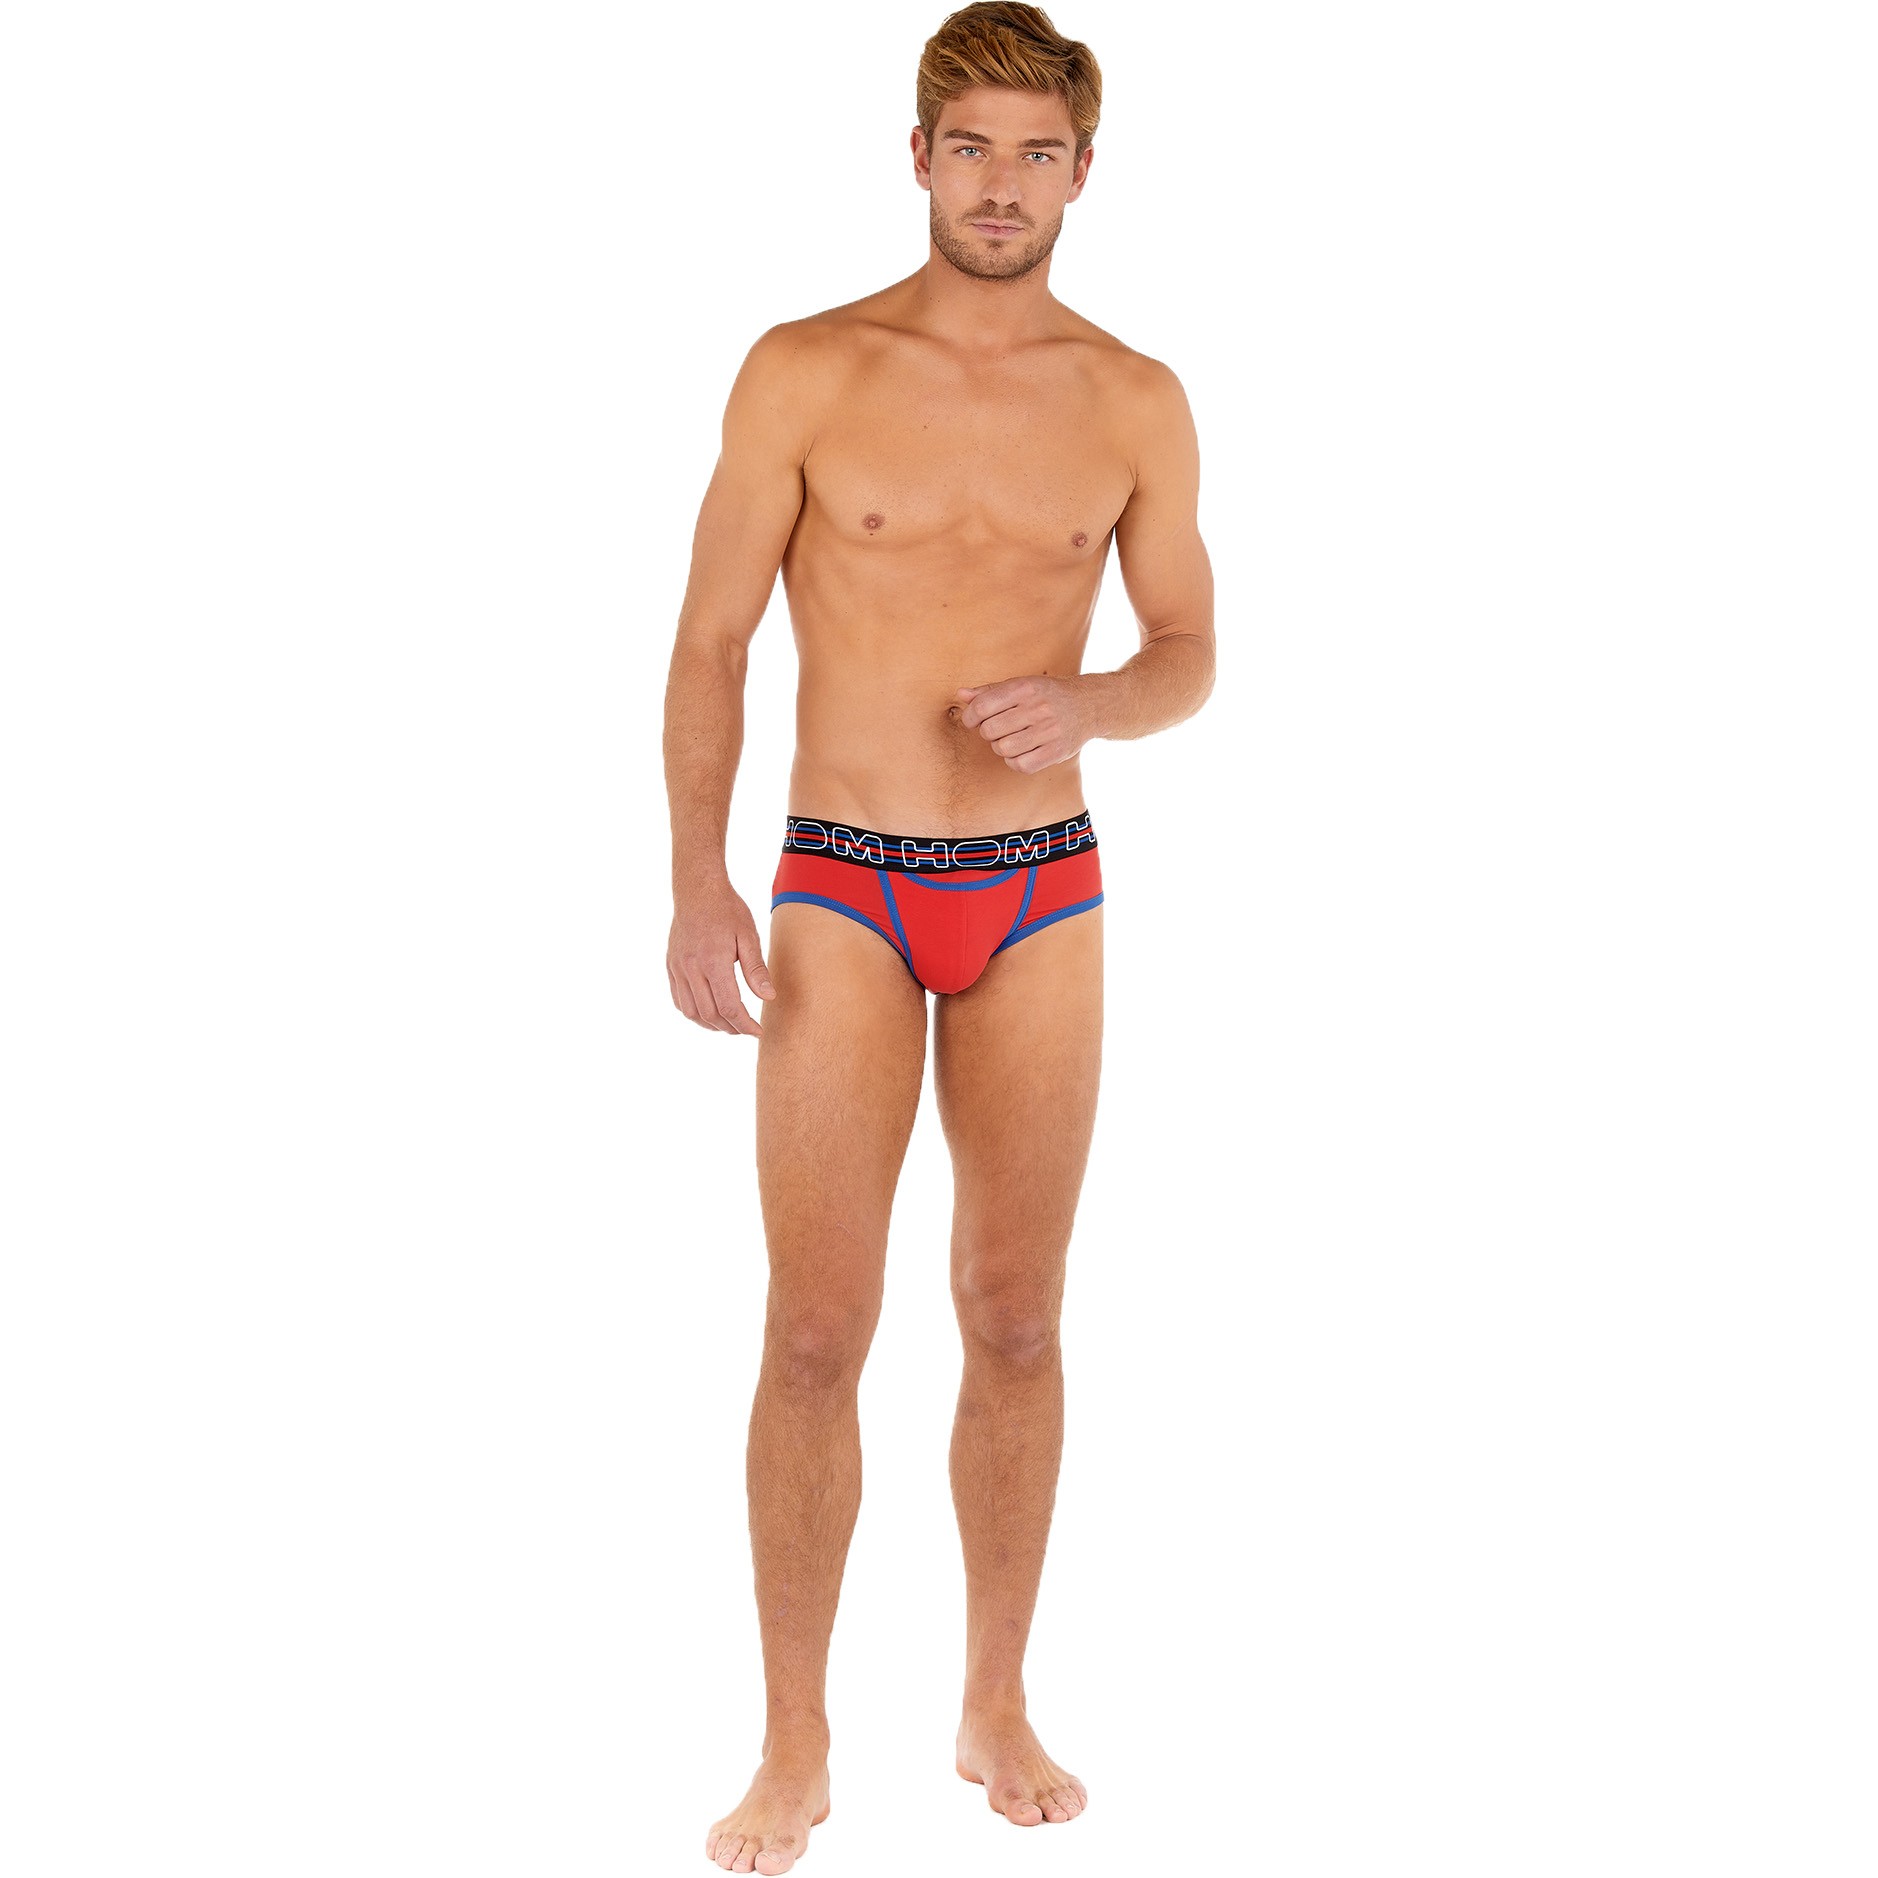 Mini slip HO1 Cotton up LIMITED EDITION - red: Briefs for man brand